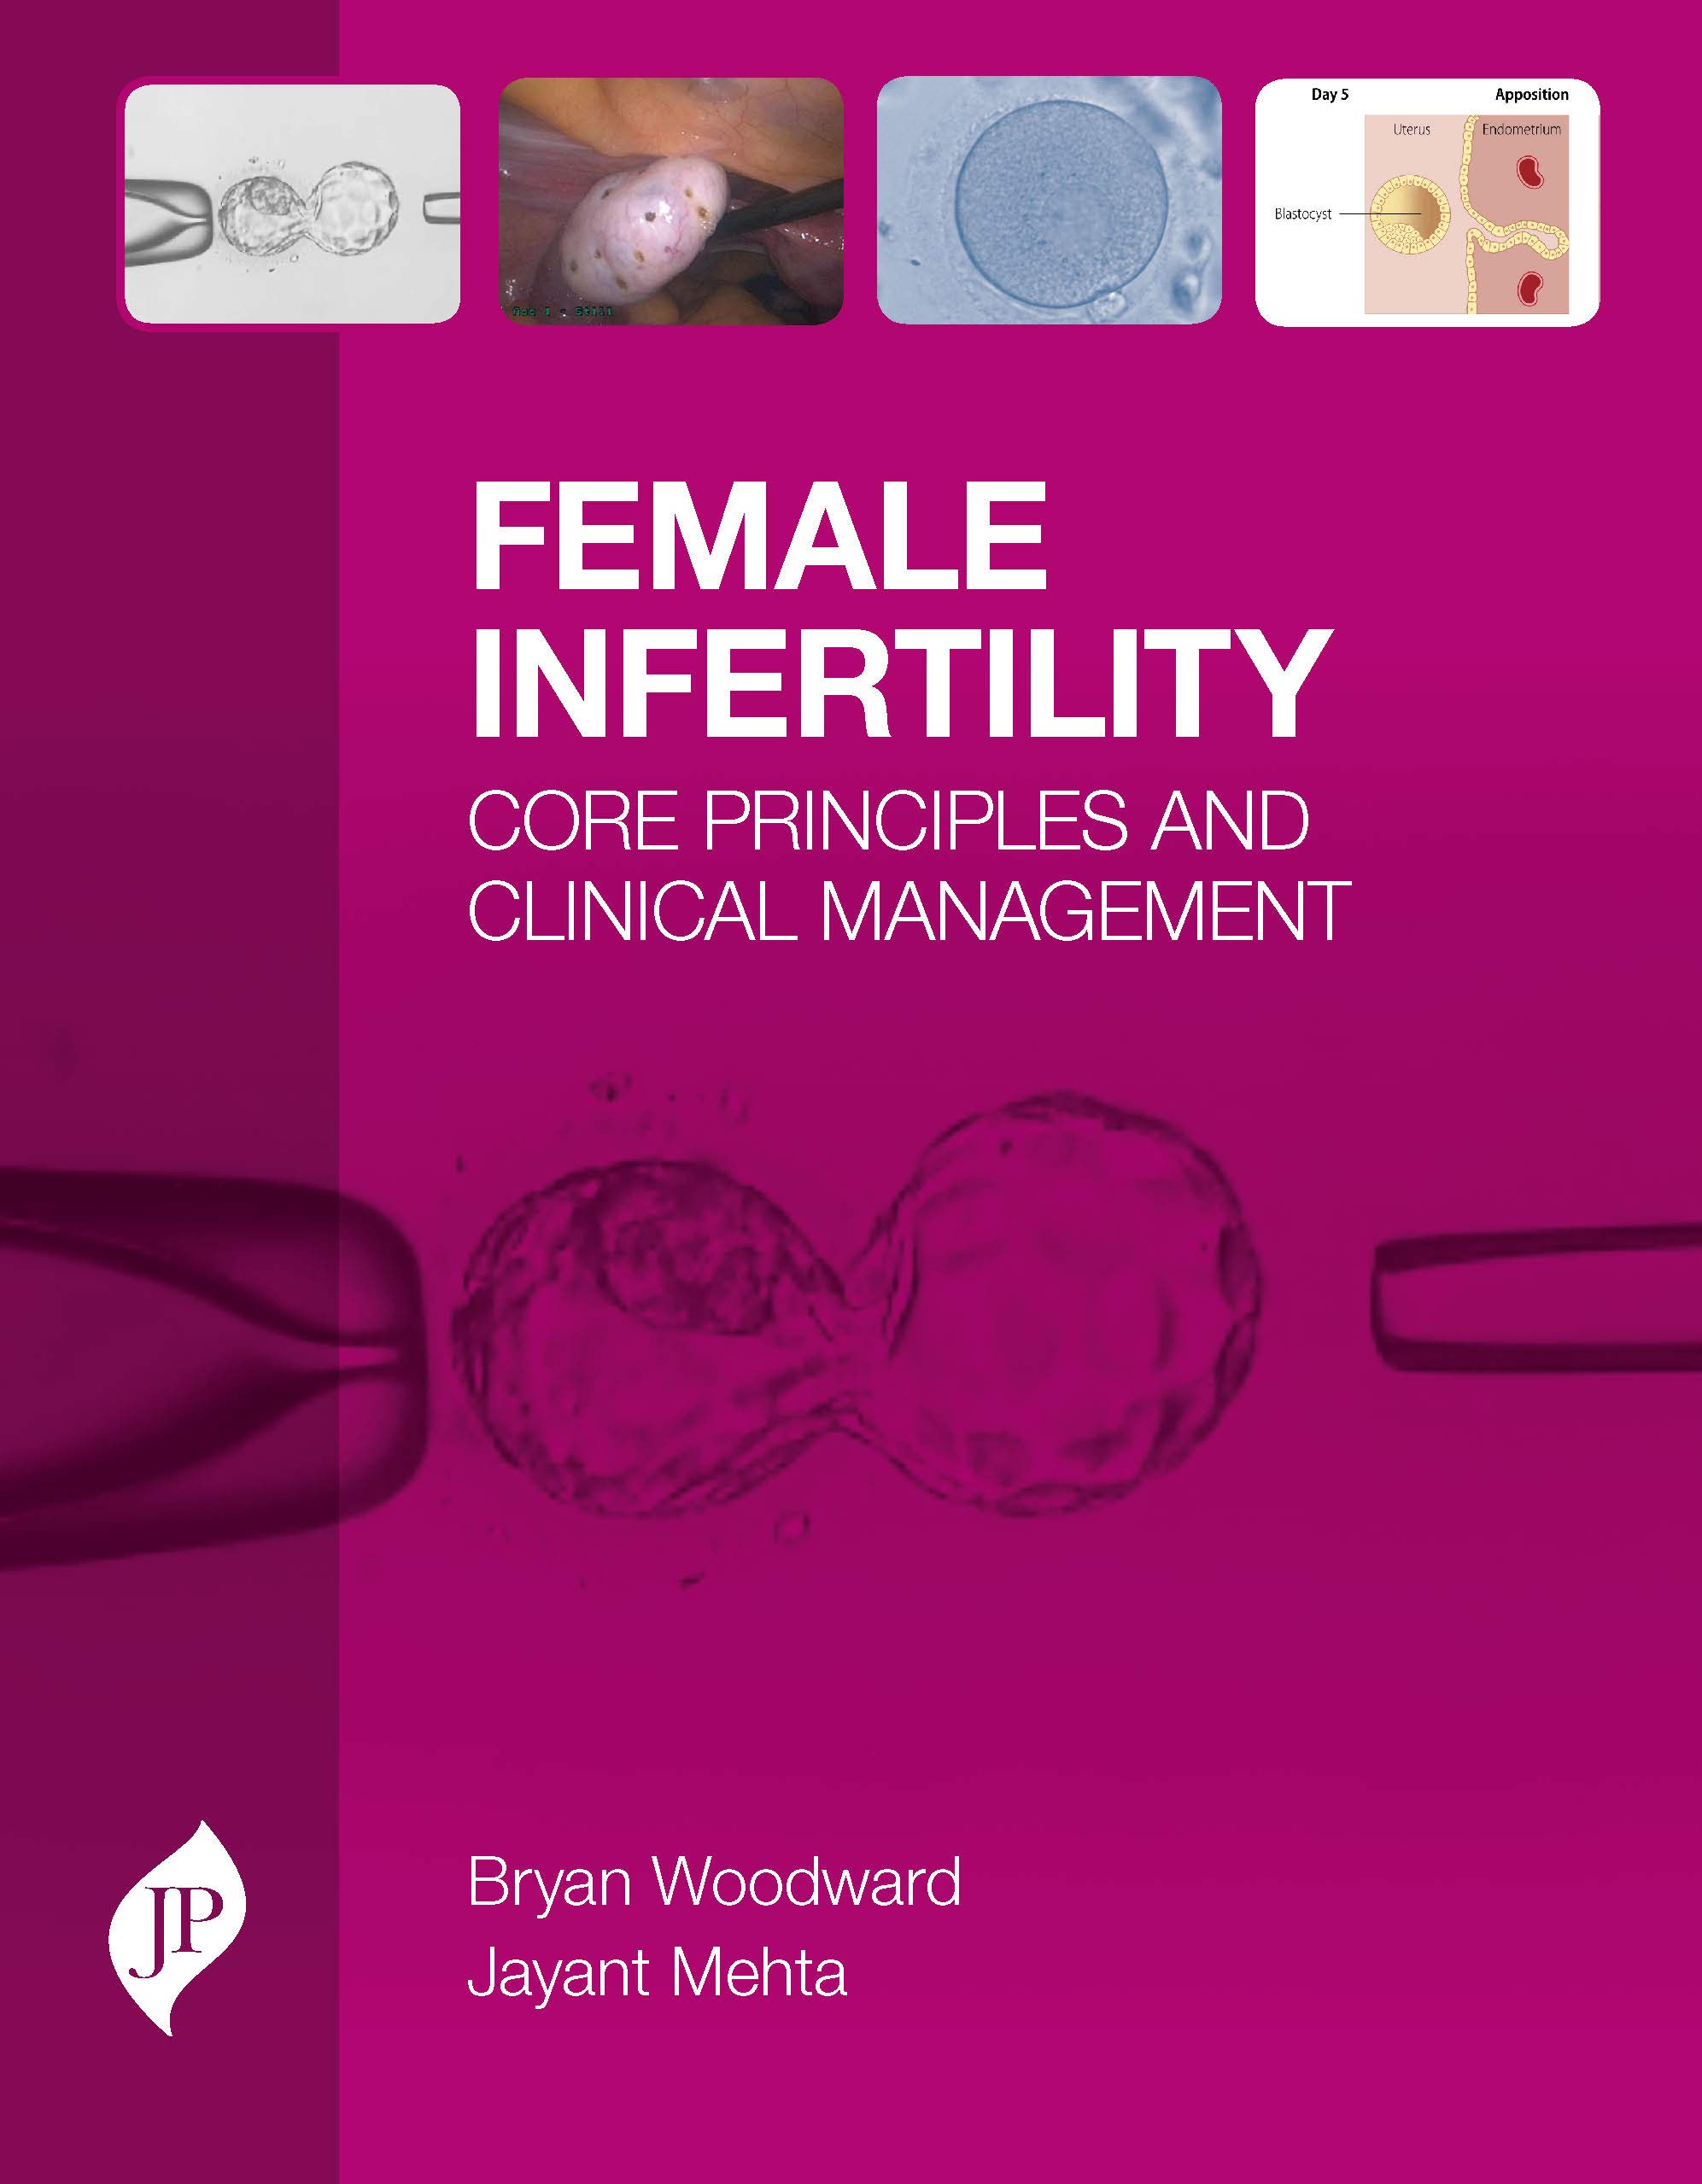 female-infertilty-core-principles-and-clinical-management